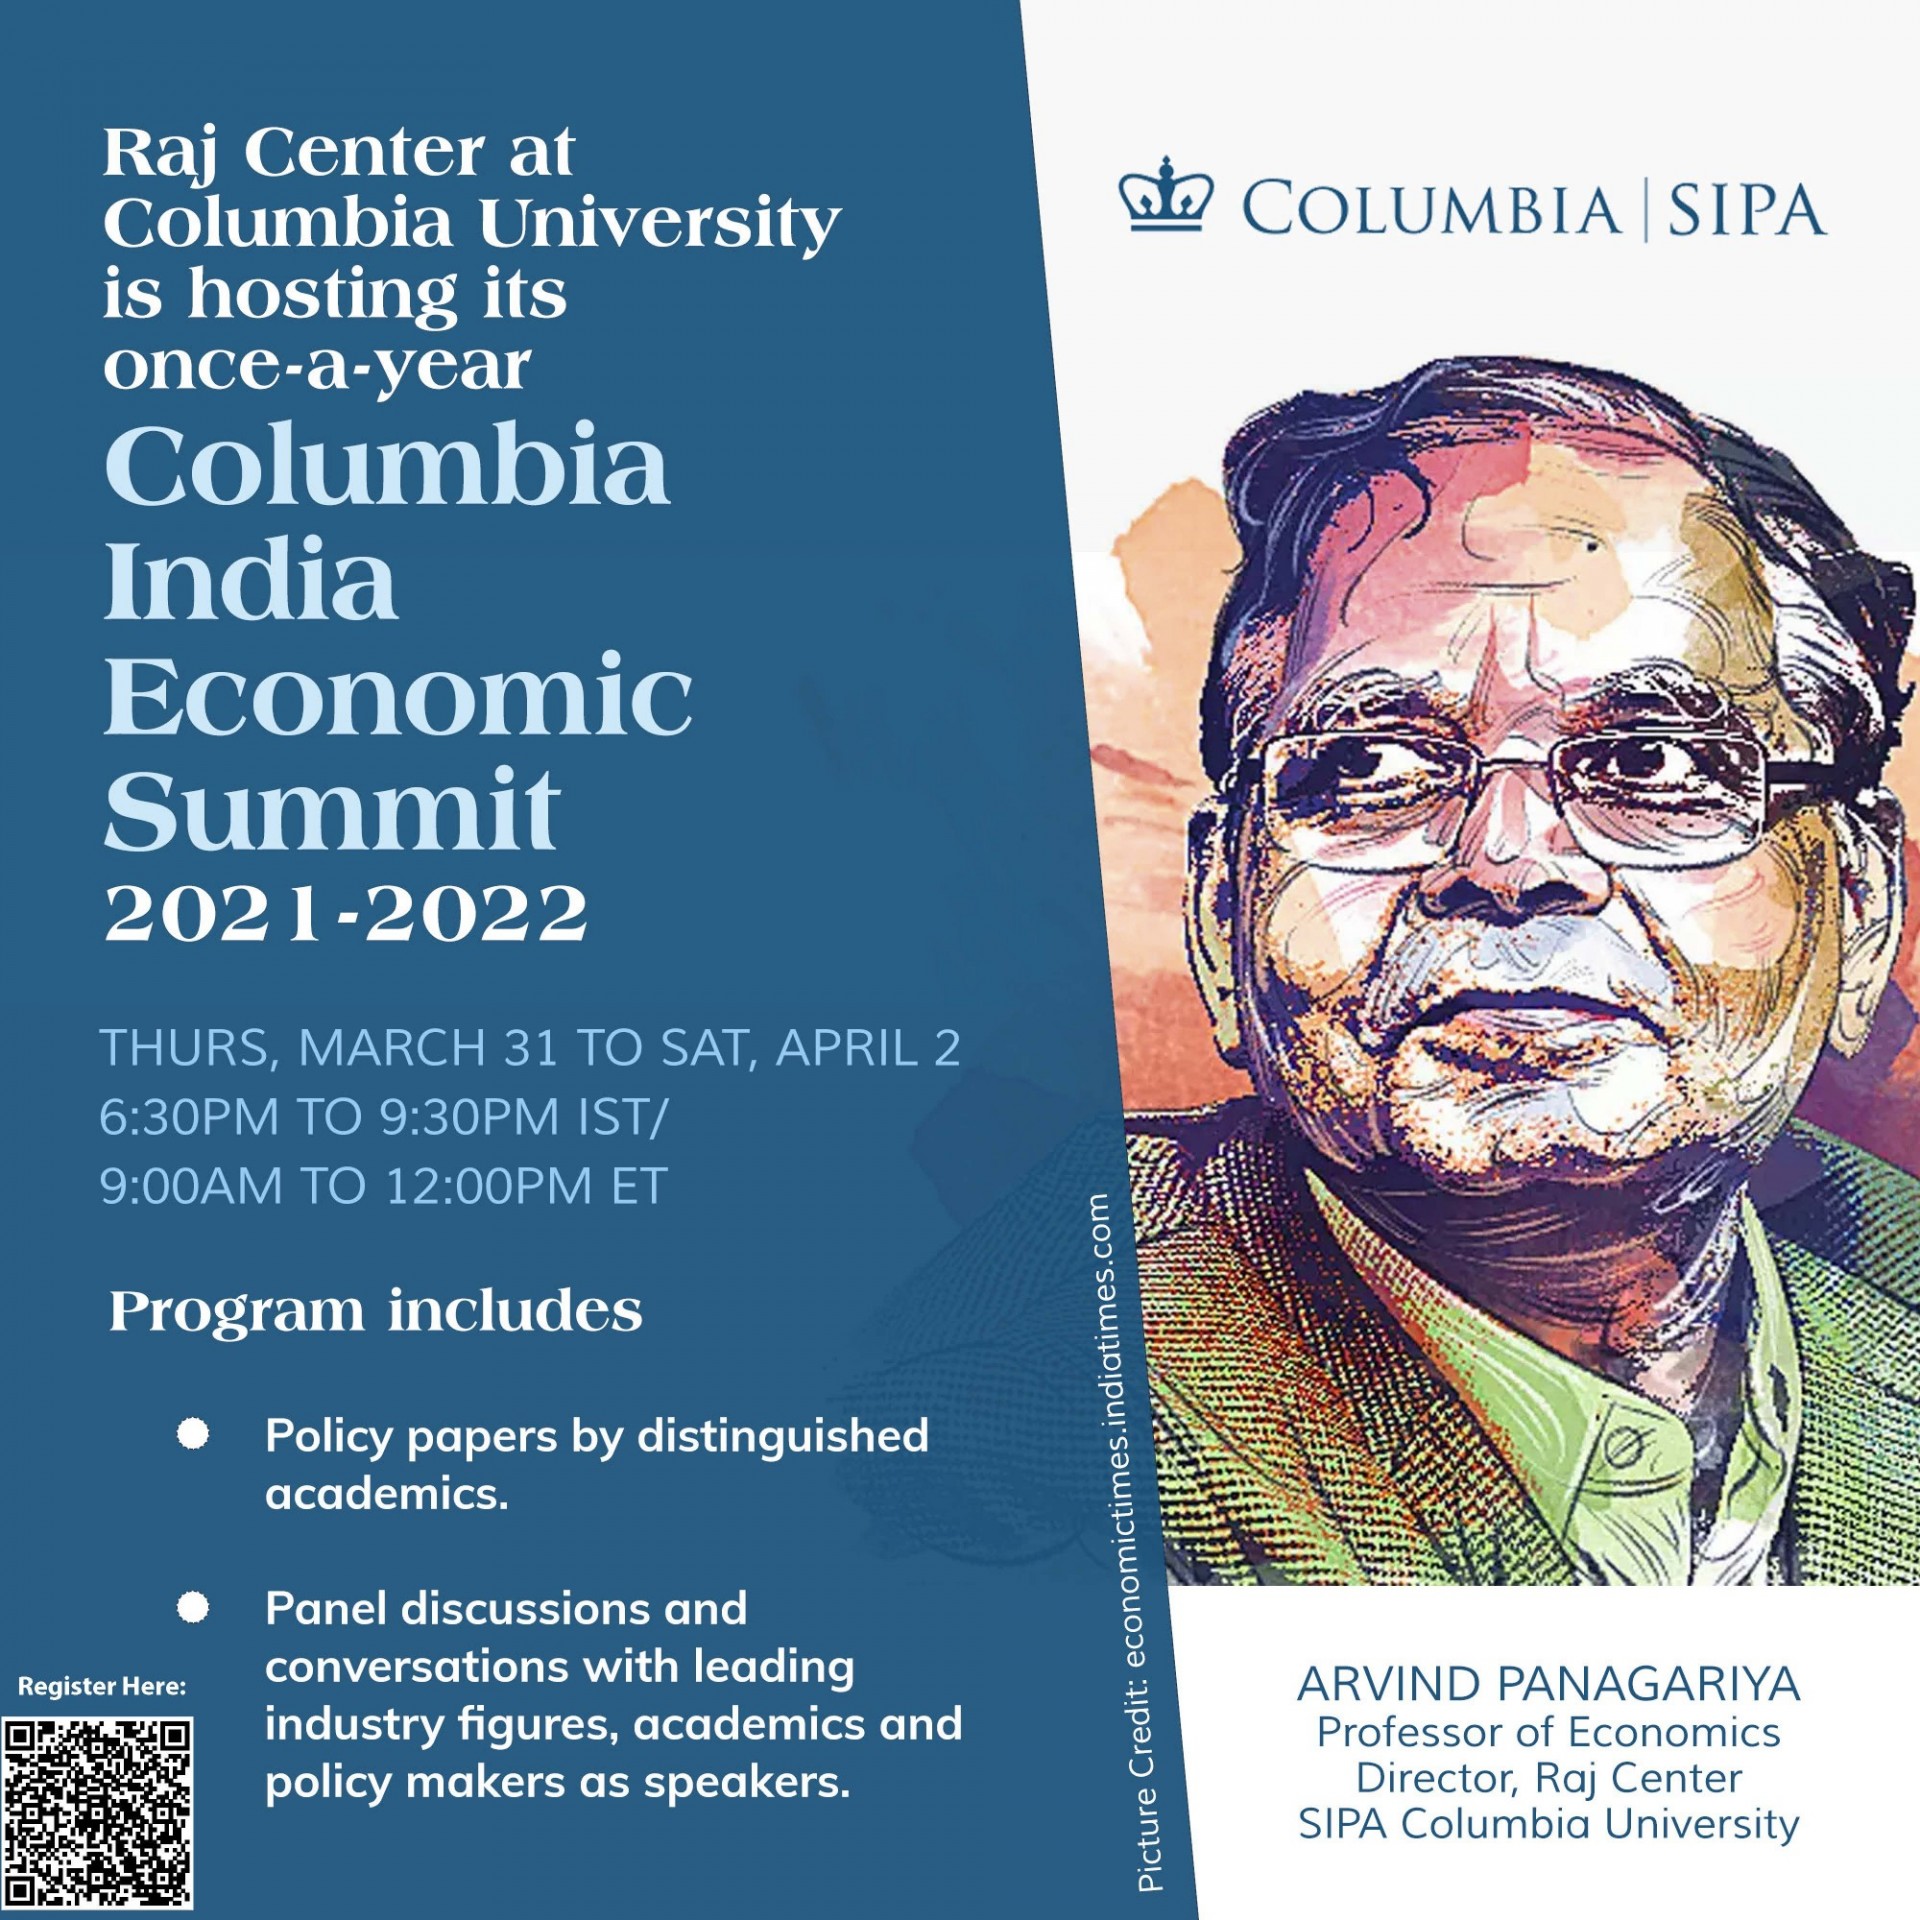 Raj Center is hosting its once-a-year Columbia India Economic Summit. Pictured: Prof. Arvind Panagariya